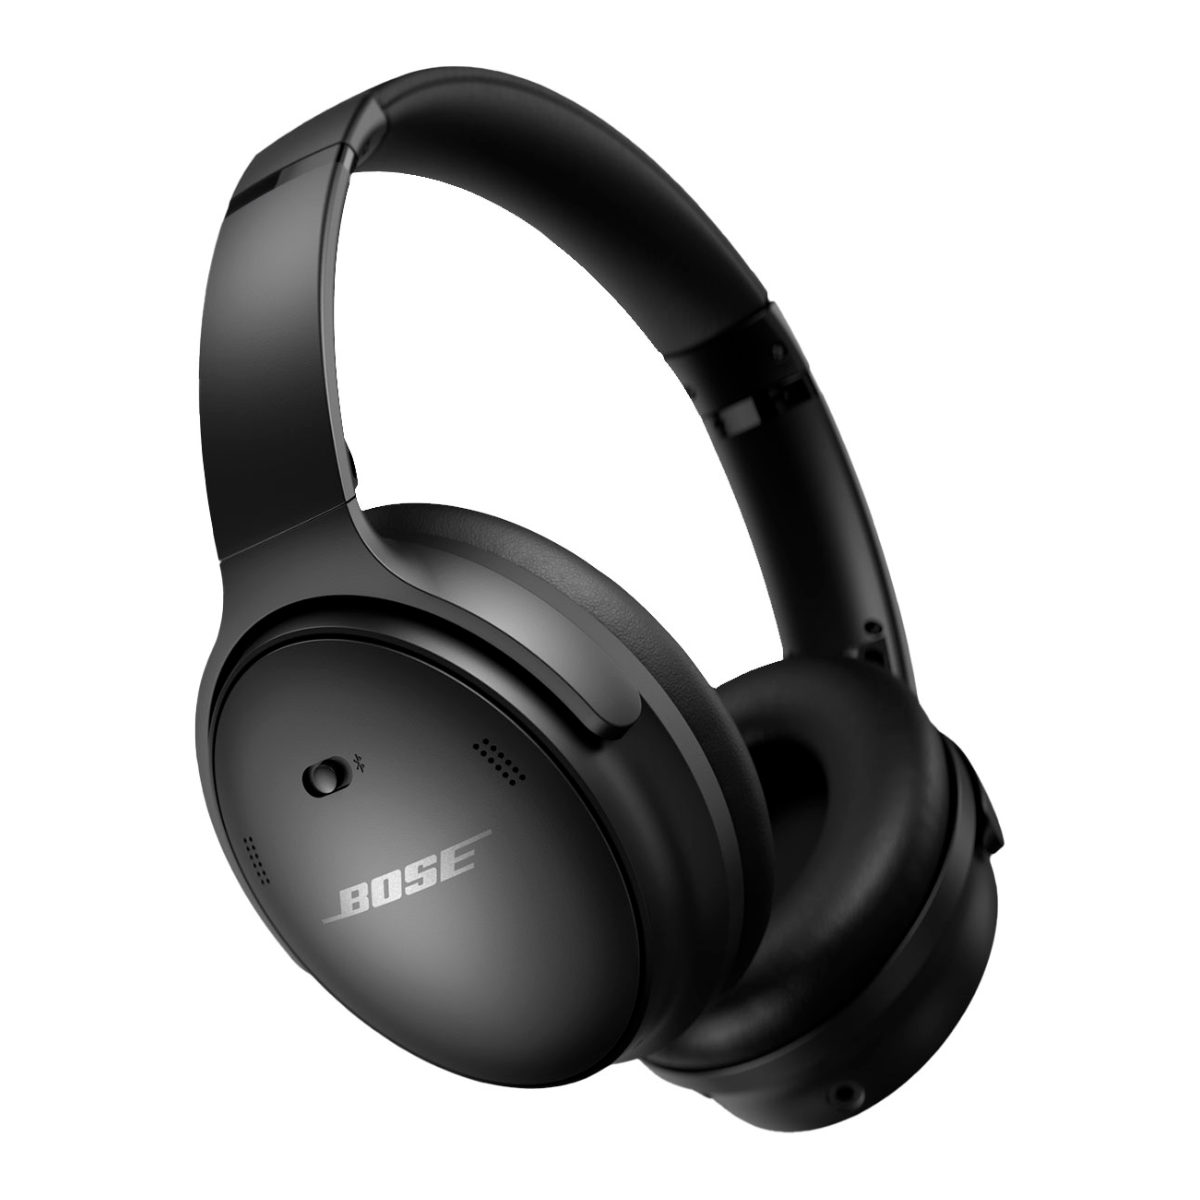 5. Immerse Him in Perfect Sound: High-Quality Noise-Canceling Headphones for Memorable Anniversary Gifts